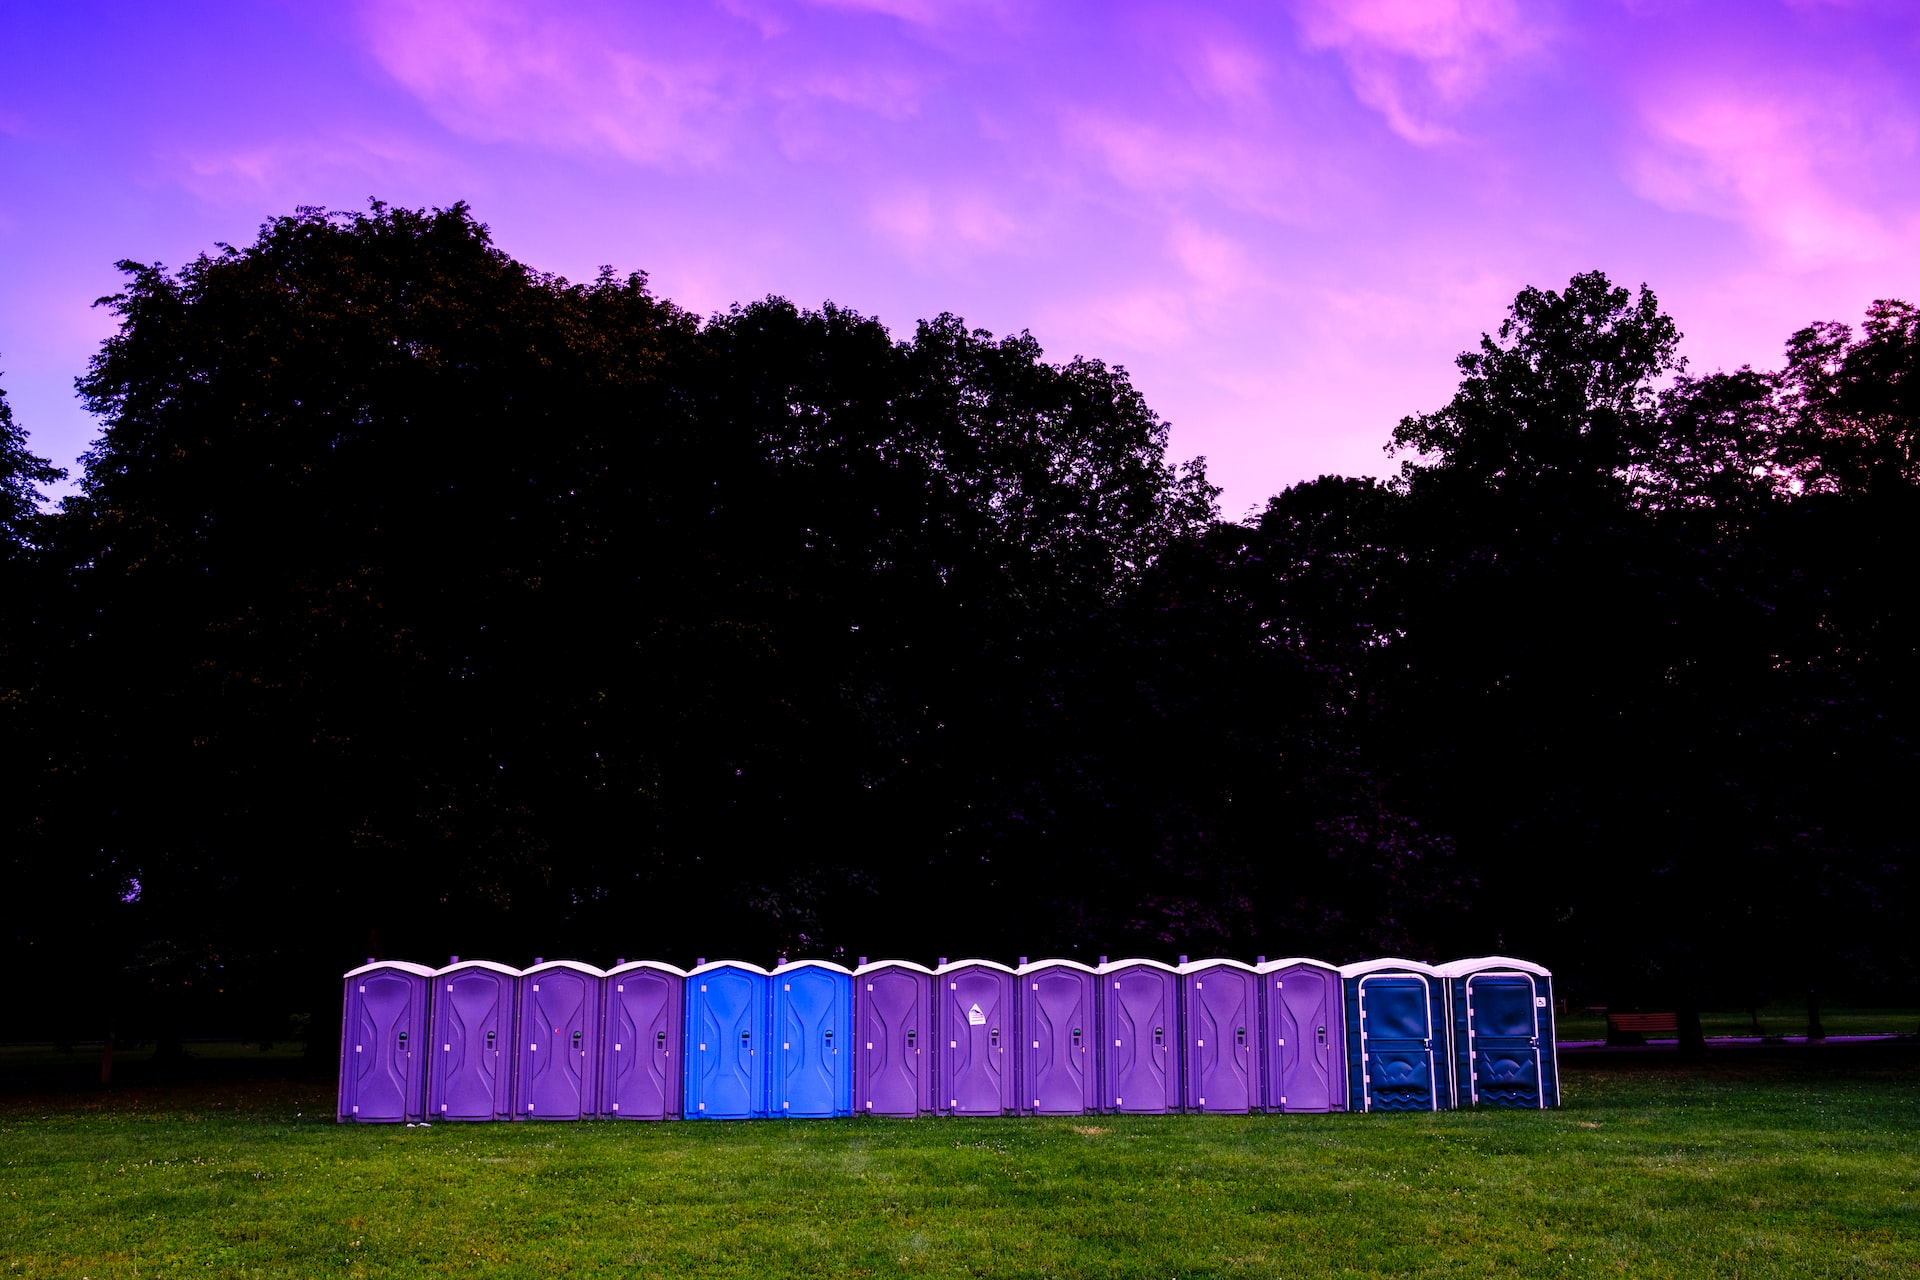 A row of purple and blue coloured porta-loos sit on green grass with dark green trees in the background silhouetted against a purple-blue sky